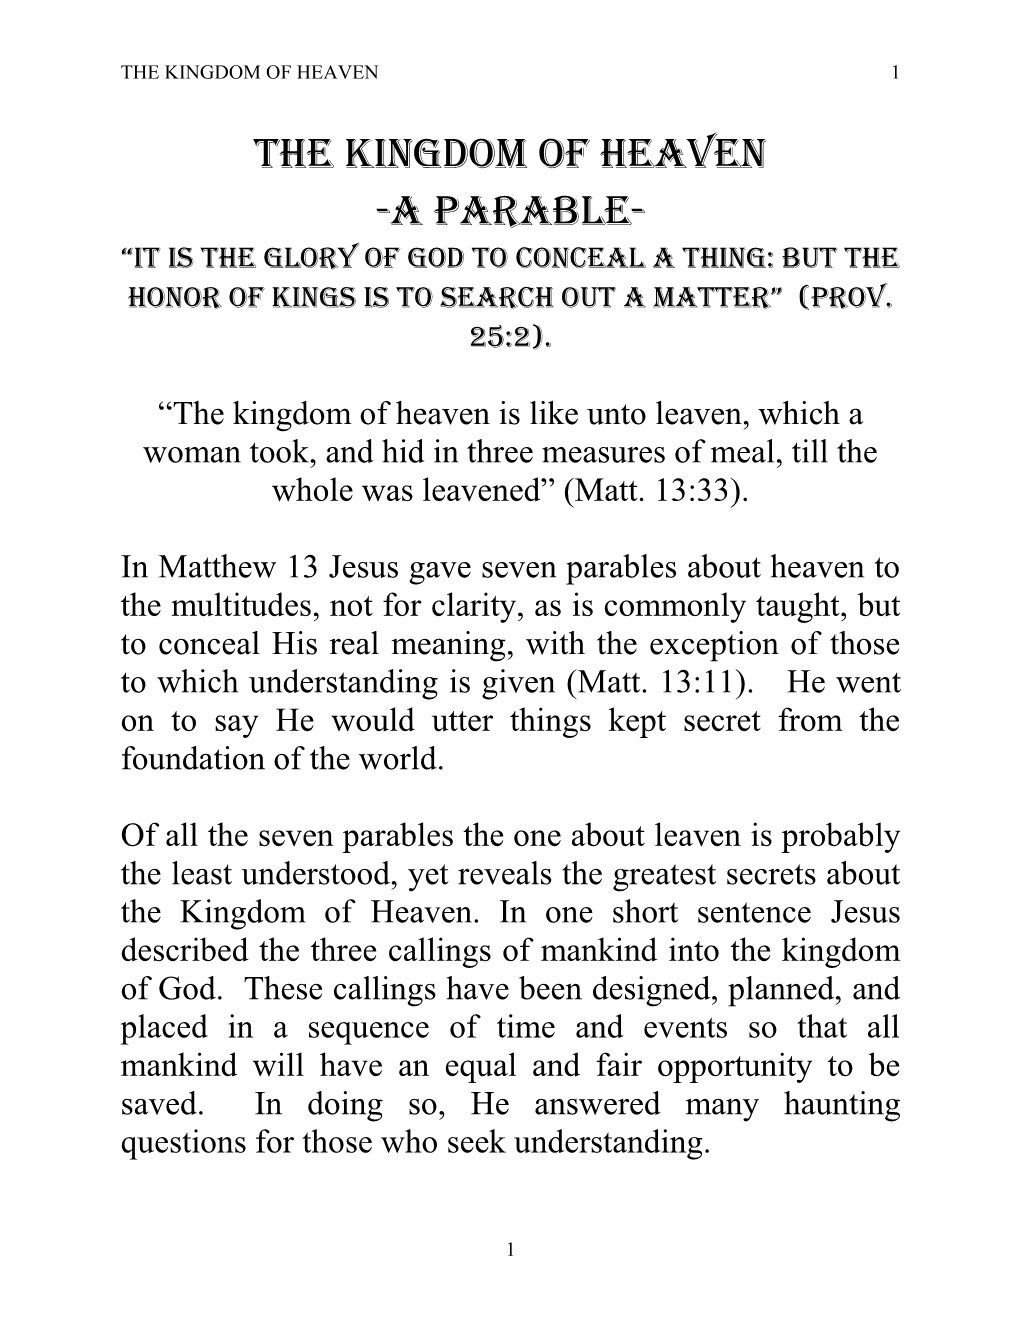 THE KINGDOM of HEAVEN, a Parable